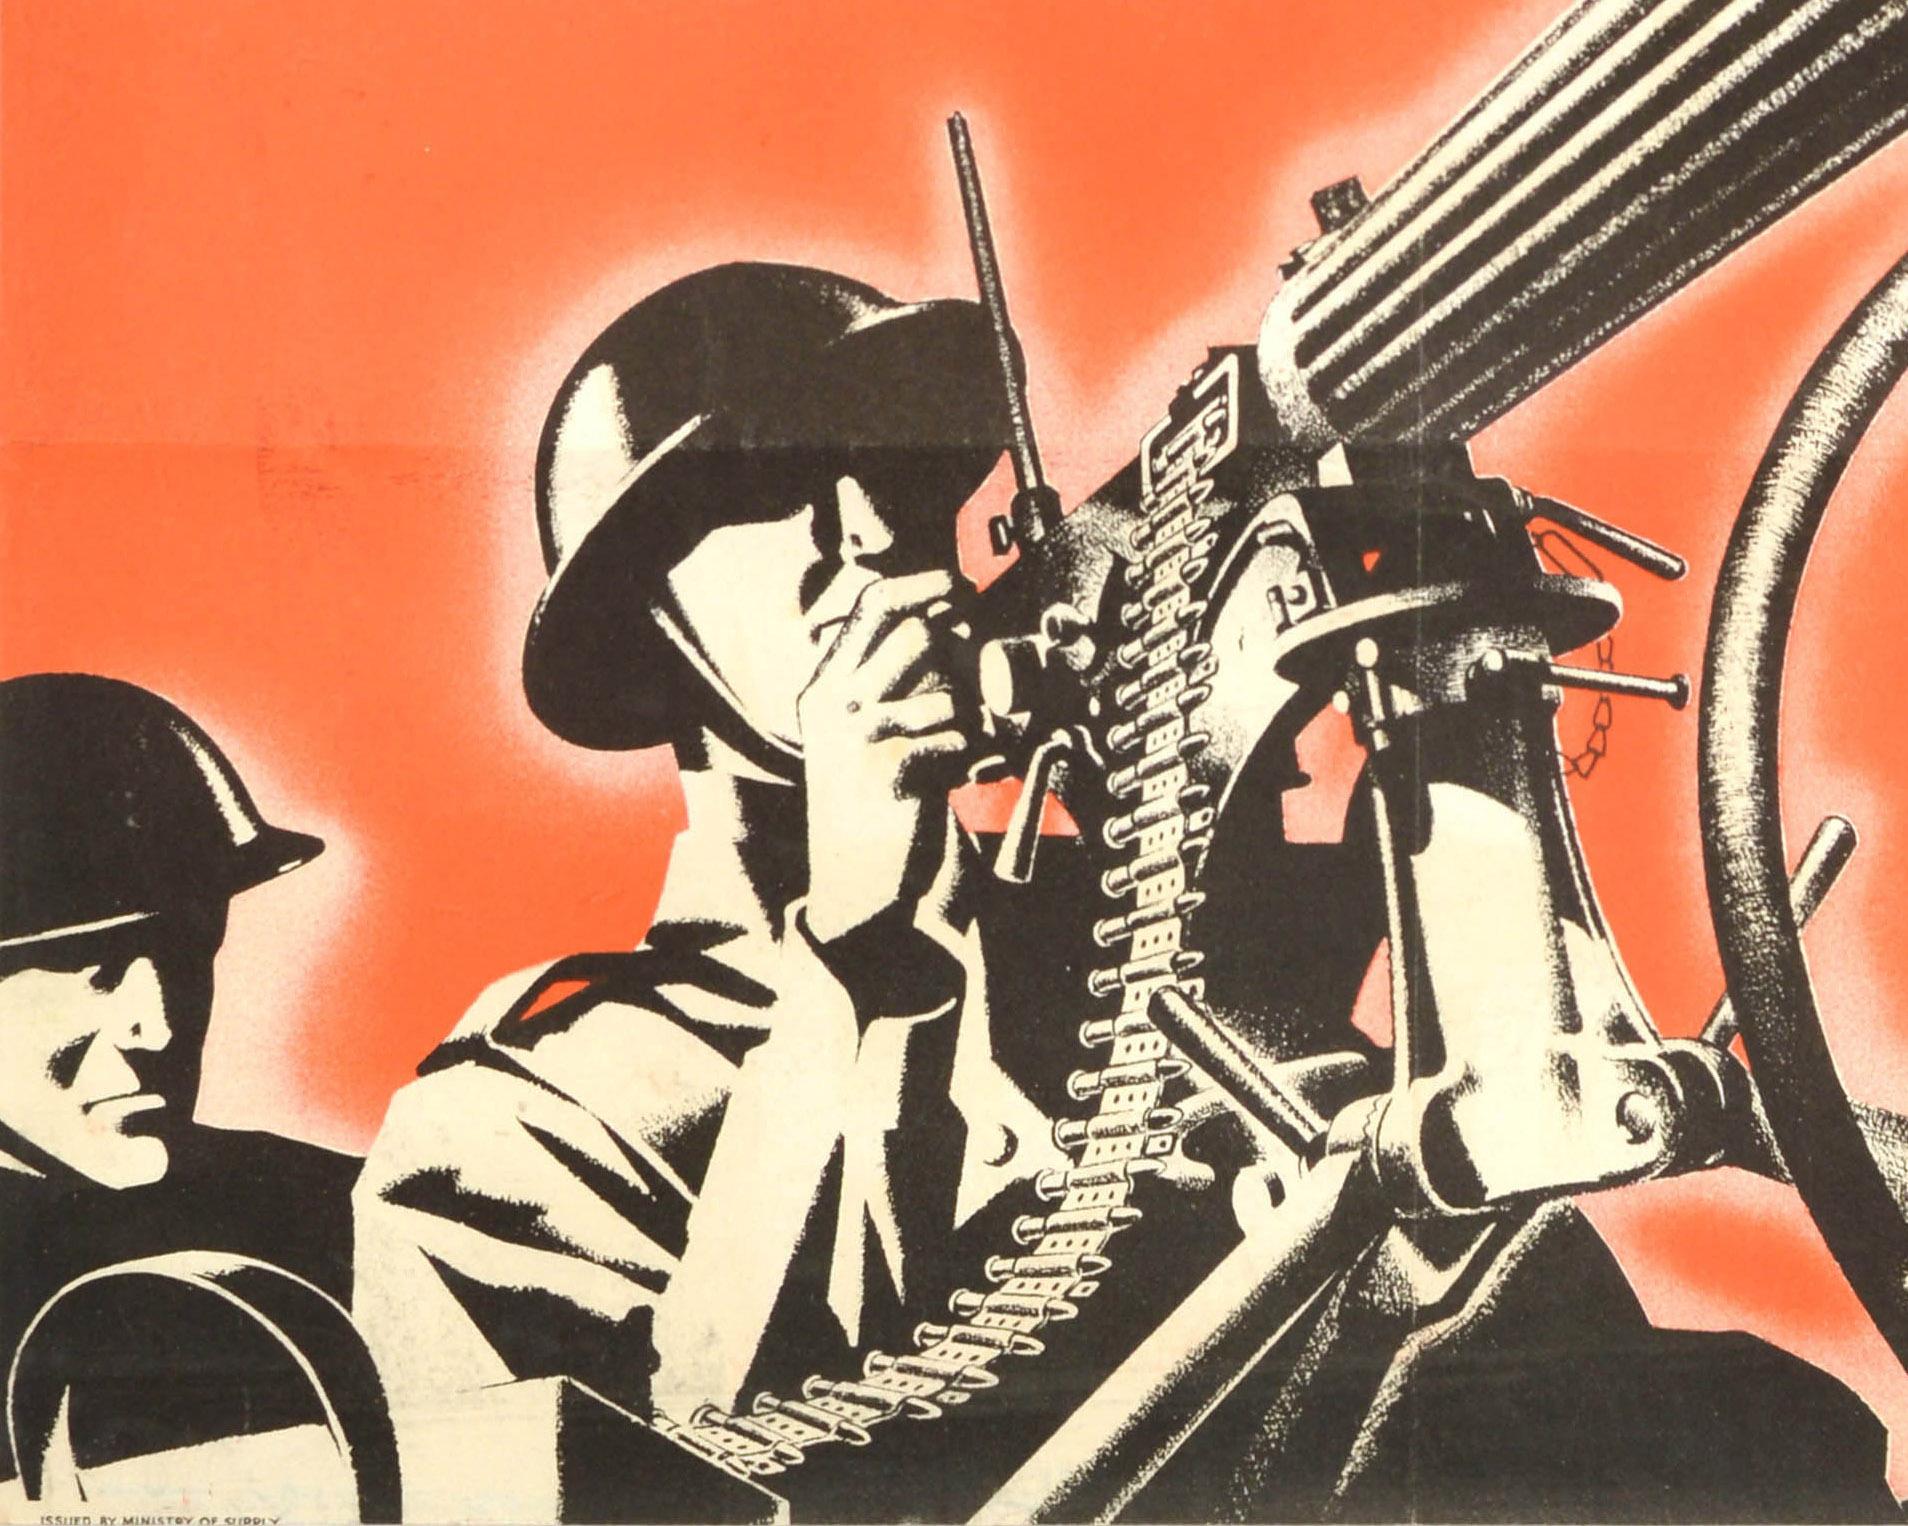 Original vintage World War Two home front recycling propaganda poster - Put out waste paper It is used for ammunition and other vital needs - featuring a soldier manning a mounted machine gun against an orange background with the bold black and